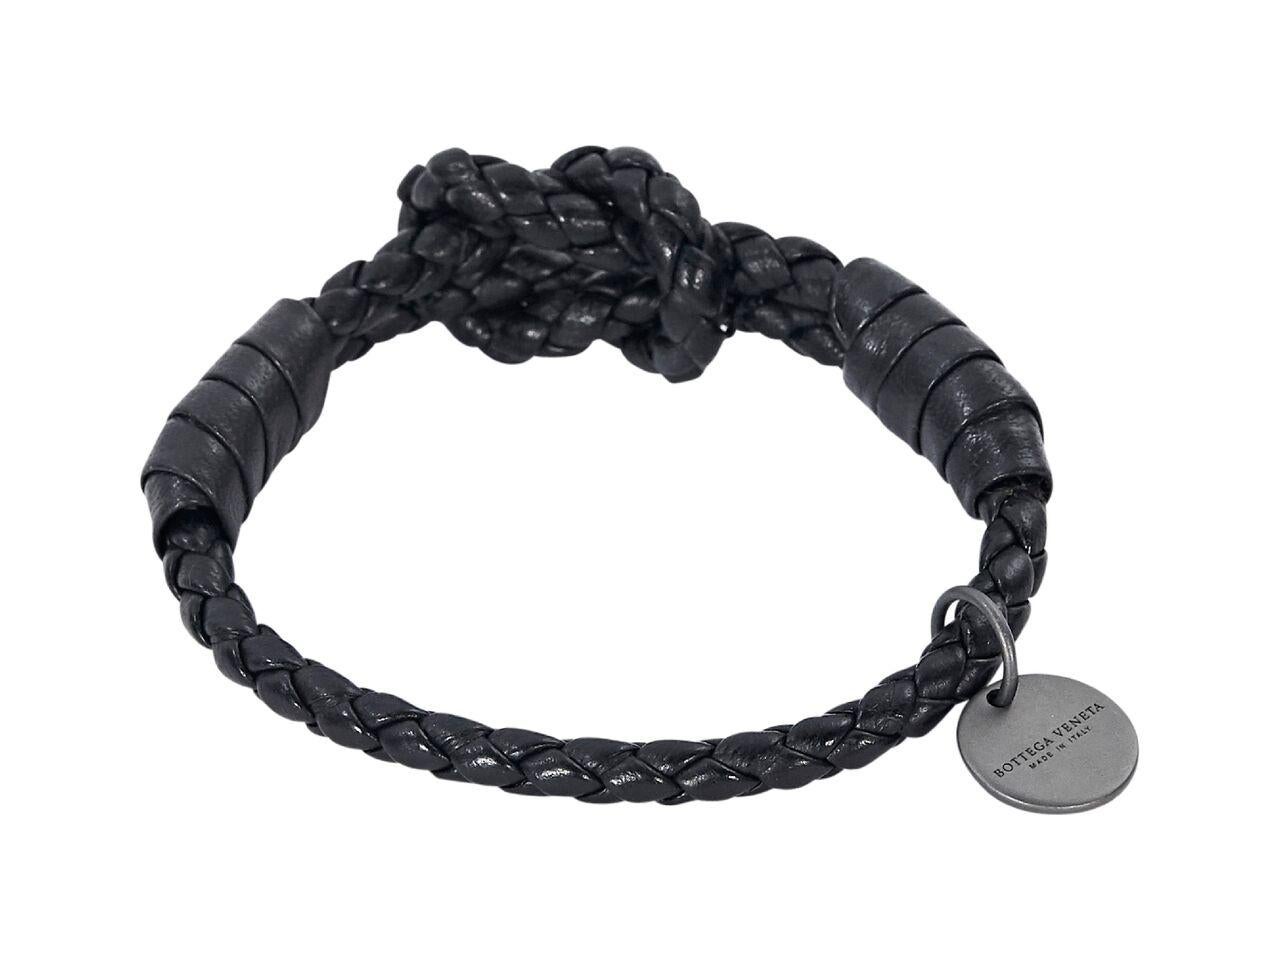 Product details:  Black braided leather bracelet by Bottega Veneta.  Knotted accent.  Gunmetal-tone hardware.  Comes with box.
Condition: Pre-owned. Very good.
Est. Retail $ 270.00